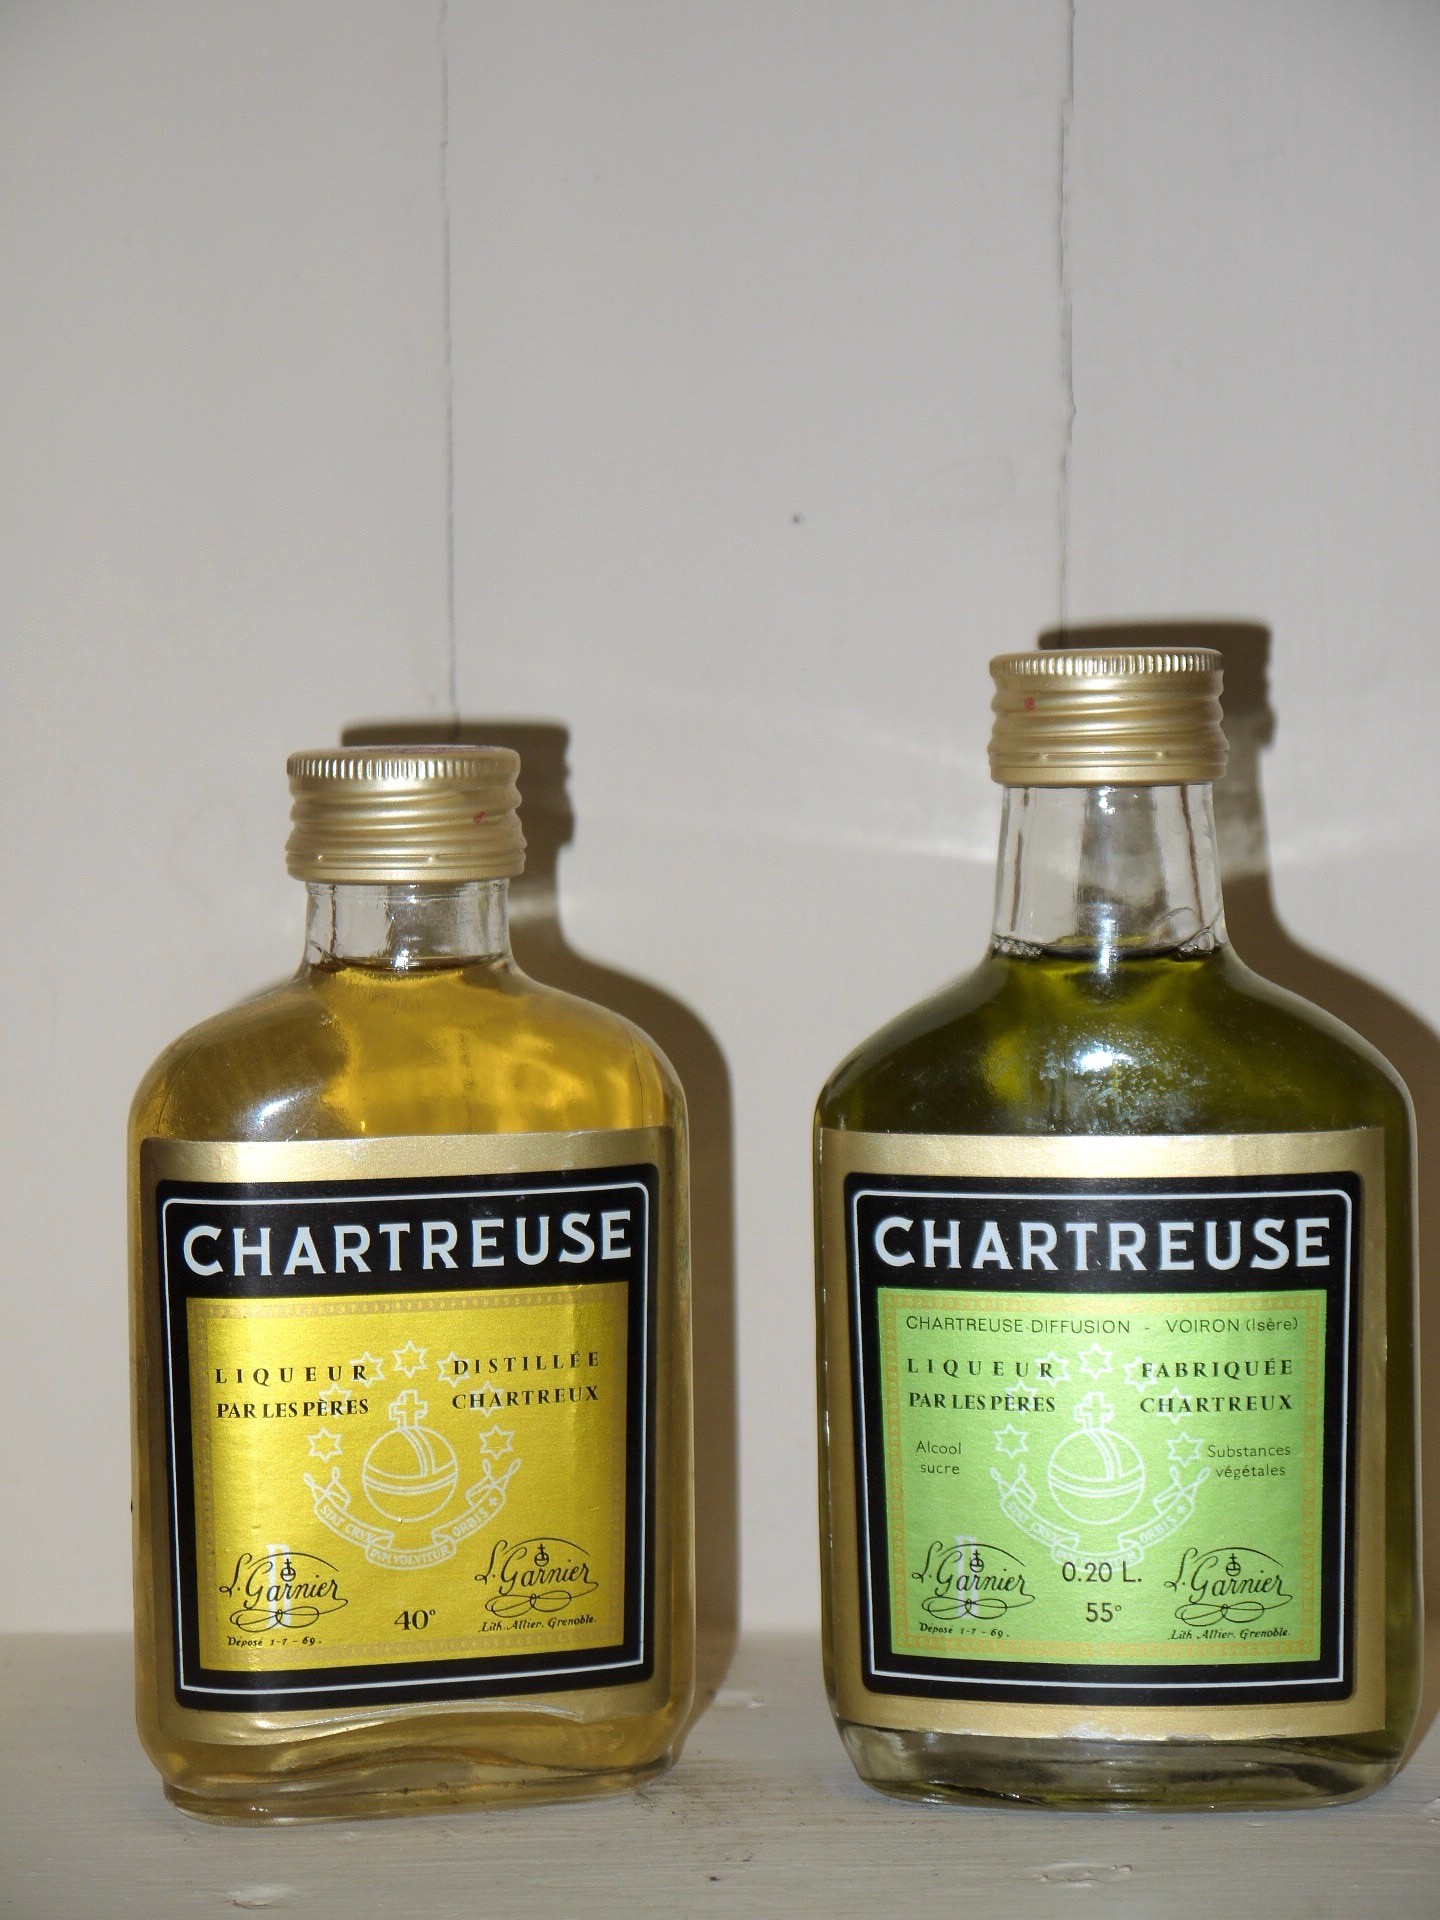 Chartreuse verte from 1966/1982 - great wine Bottles in Paradise